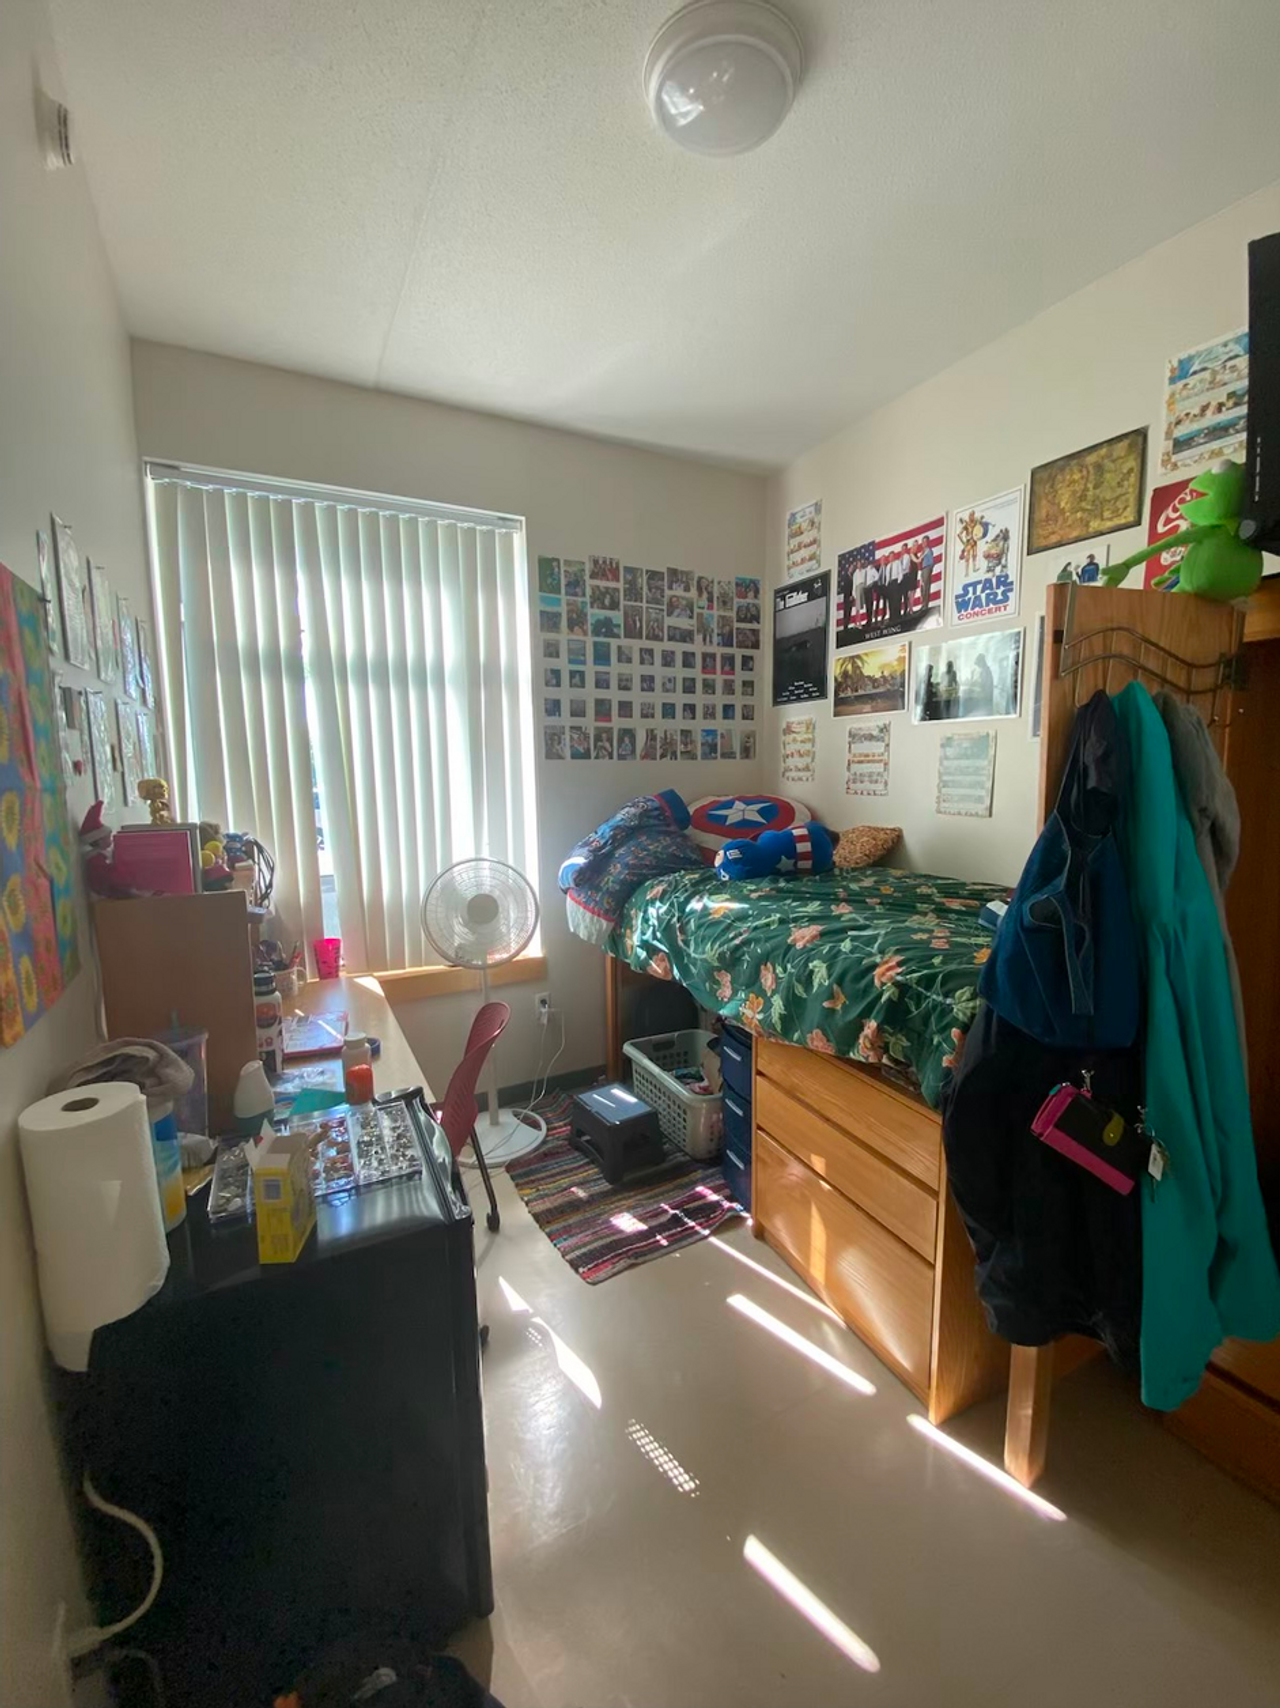 swimming pools and granite countertops: how college dorms got so expensive